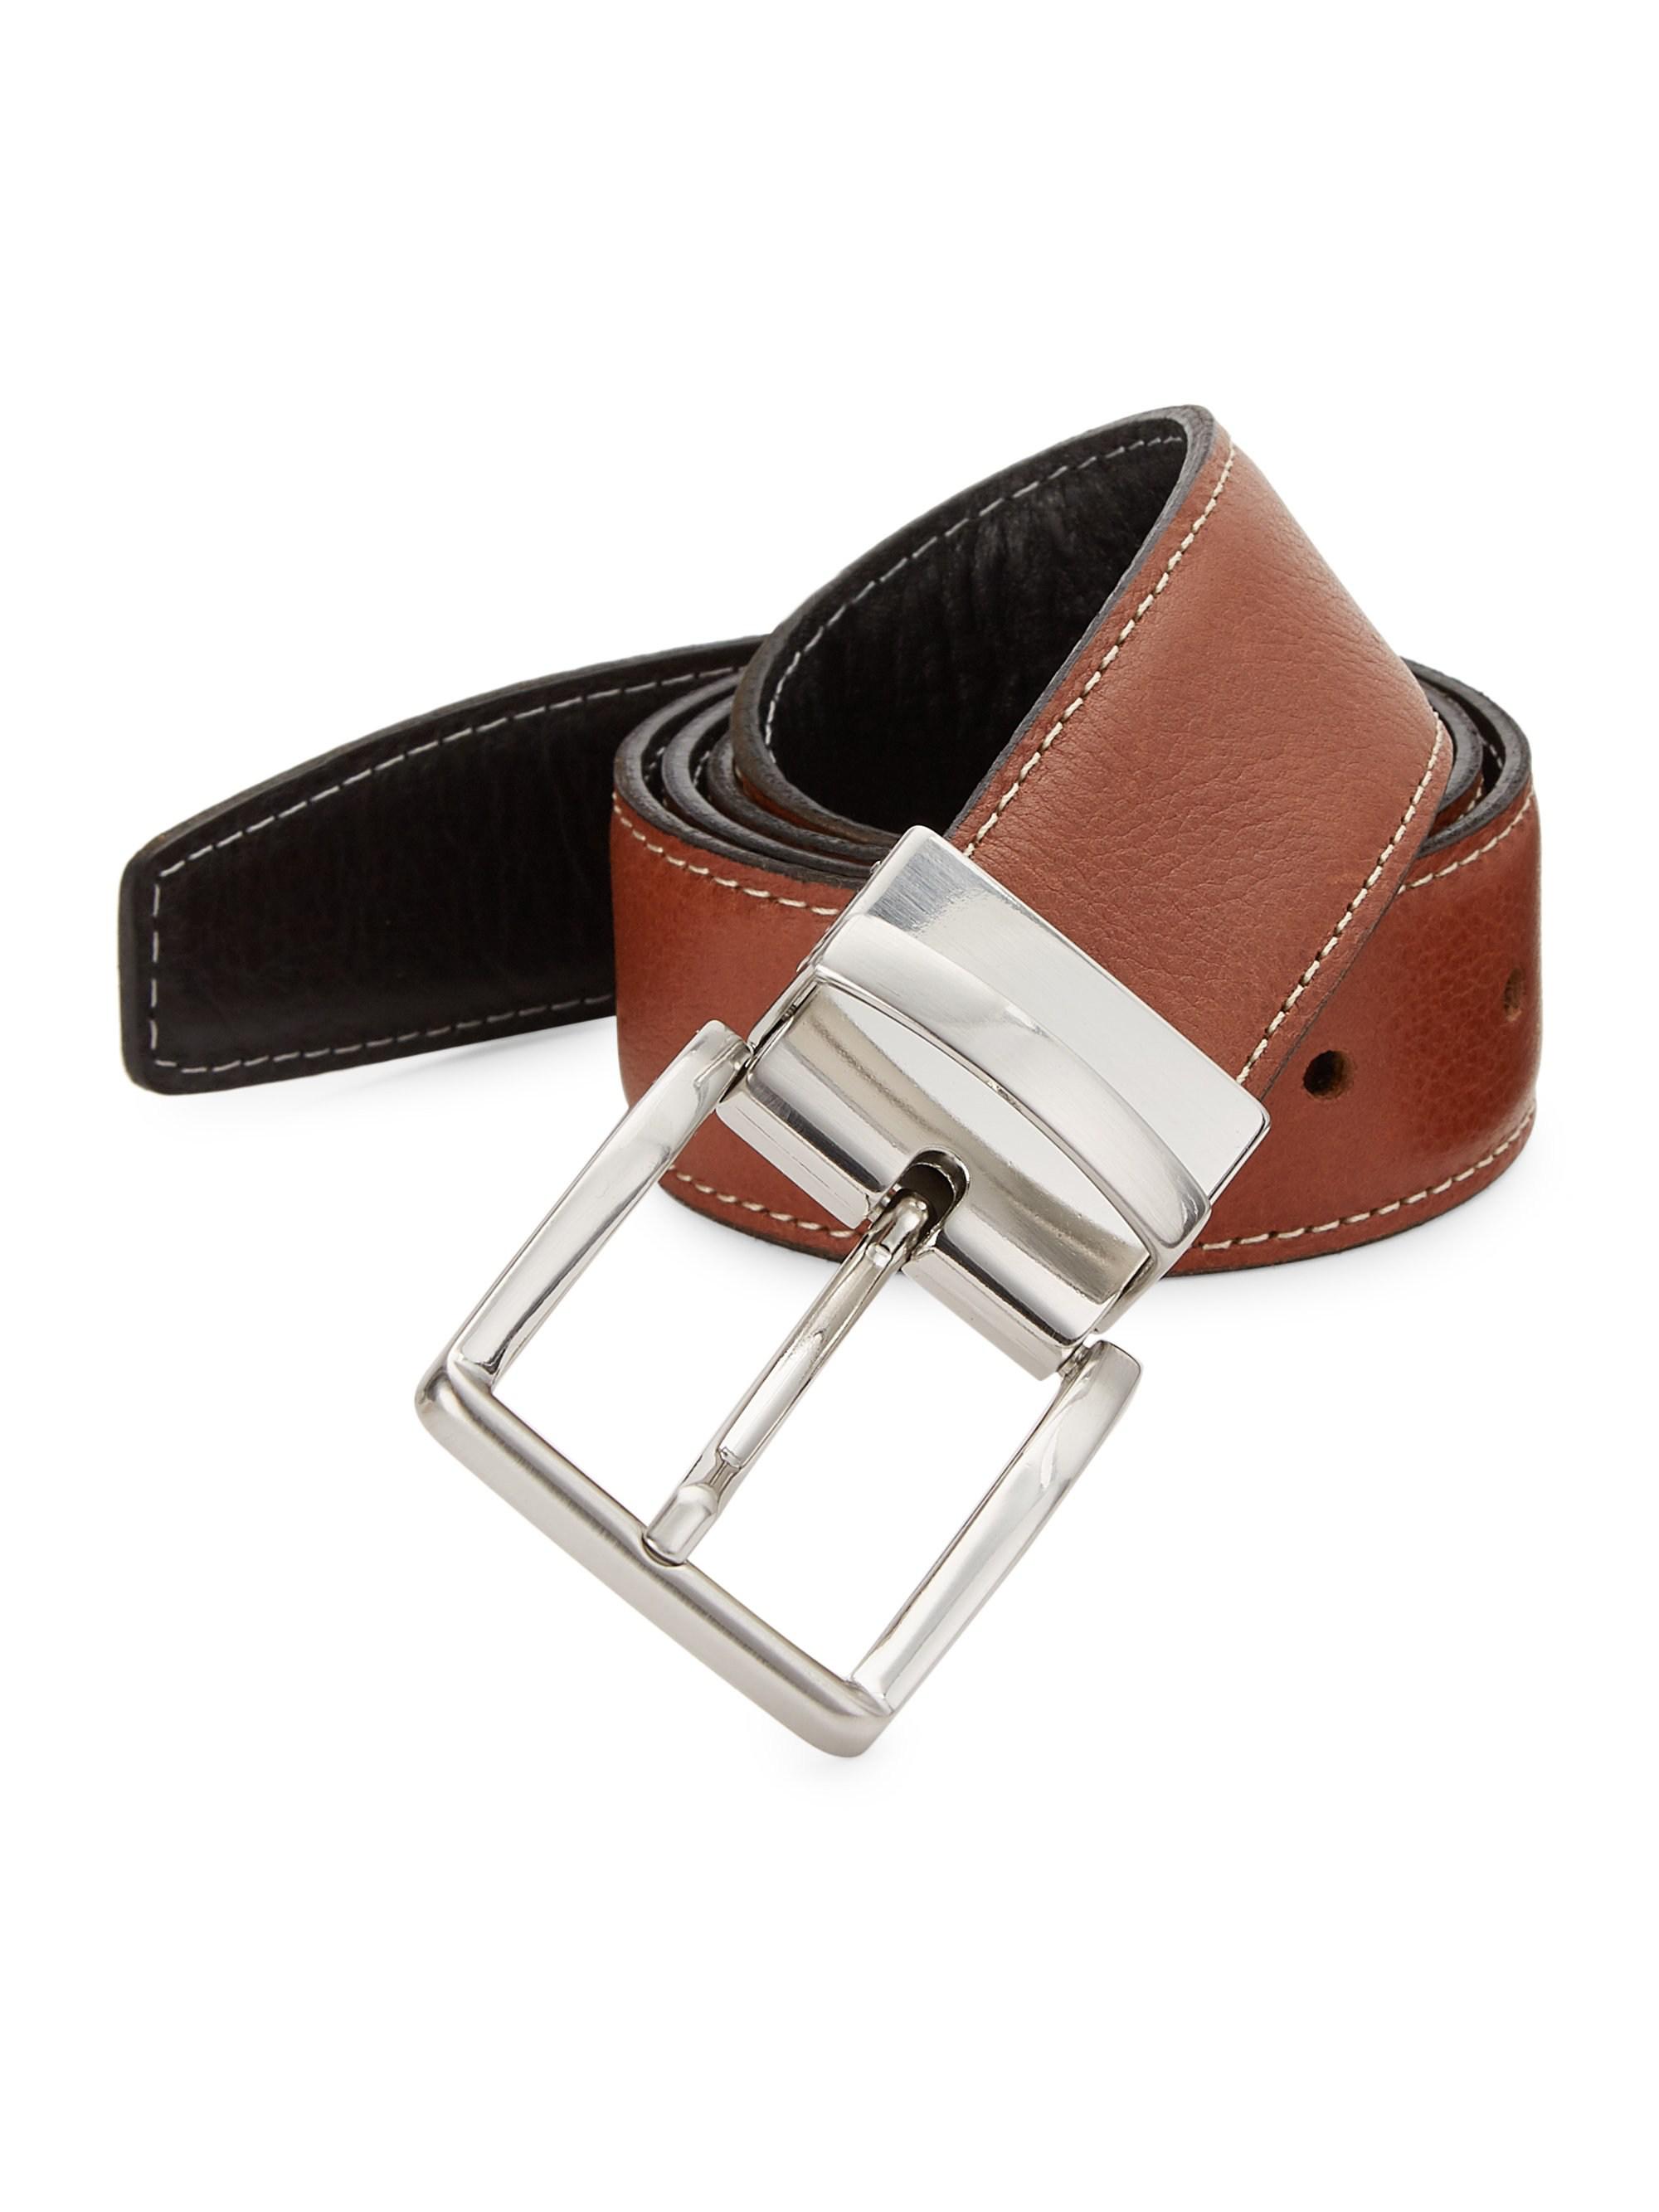 Lyst - Saks Fifth Avenue Collection Contrast Stitch Reversible Leather Belt in Brown for Men